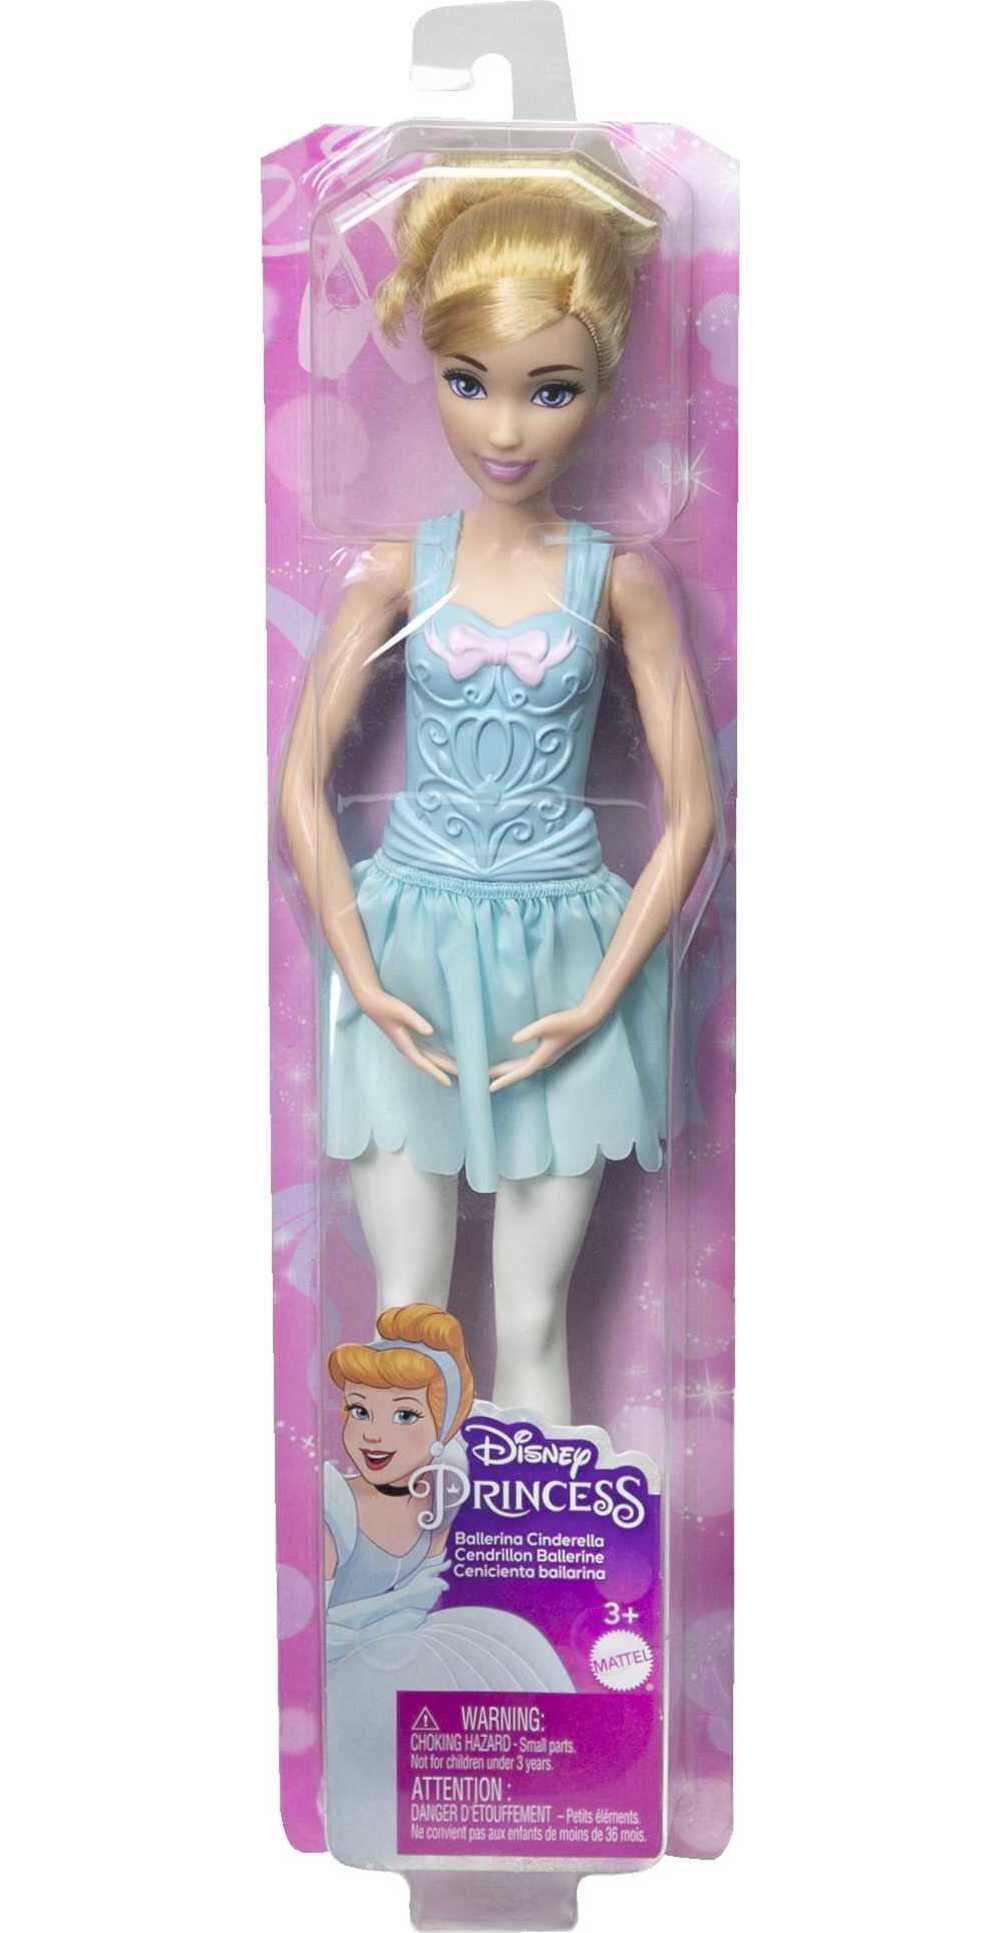 Disney Princess Ballerina Cinderella Fashion Doll with Posable Arms and  Legs for Ballet Pretend Play